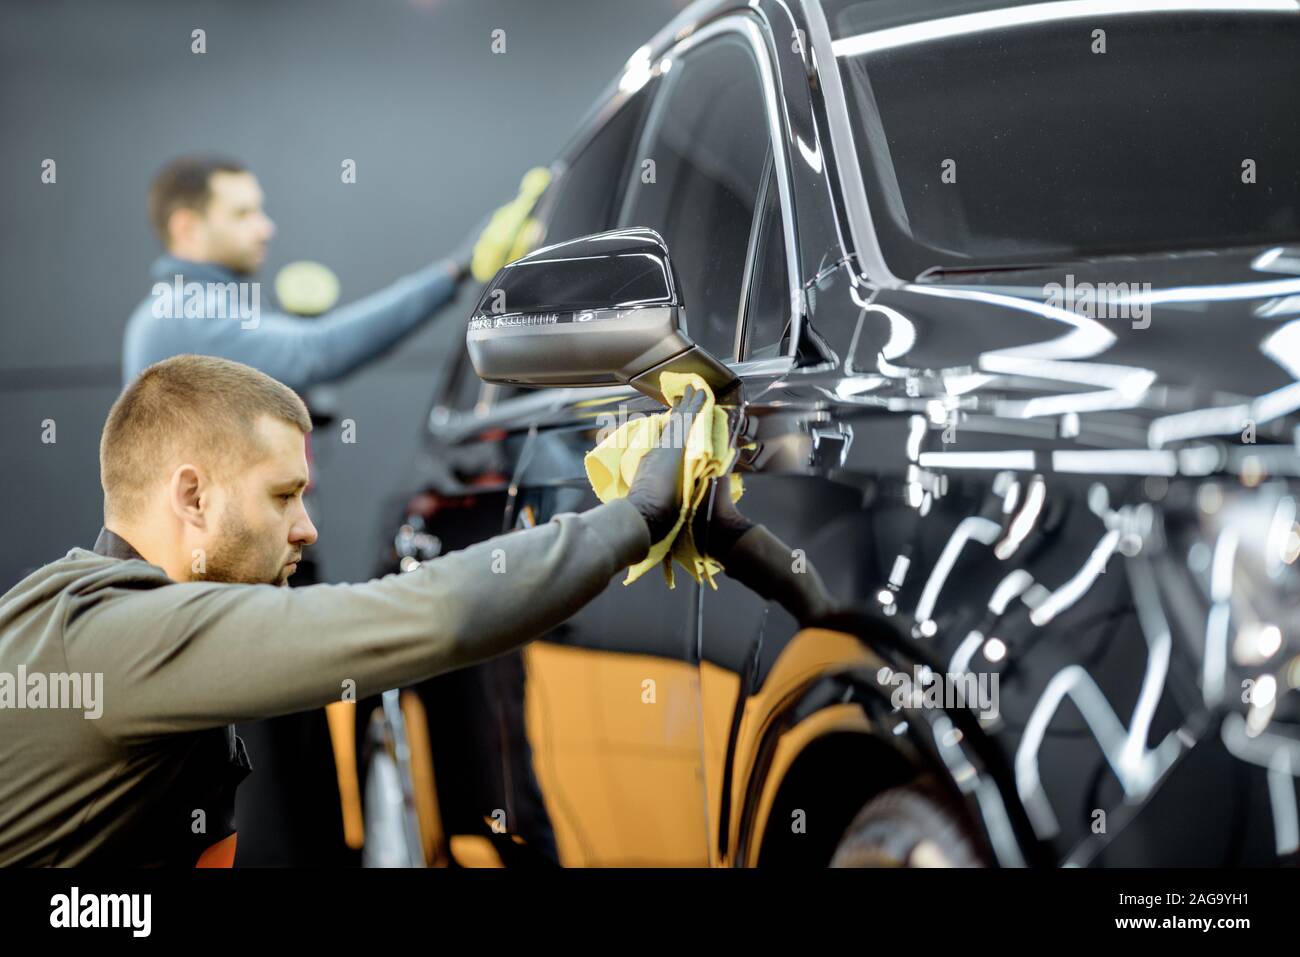 Car service workers wiping vehicle body with microfiber, examining glossy coating after the polishing procedure. Professional car detailing and maintenance concept Stock Photo